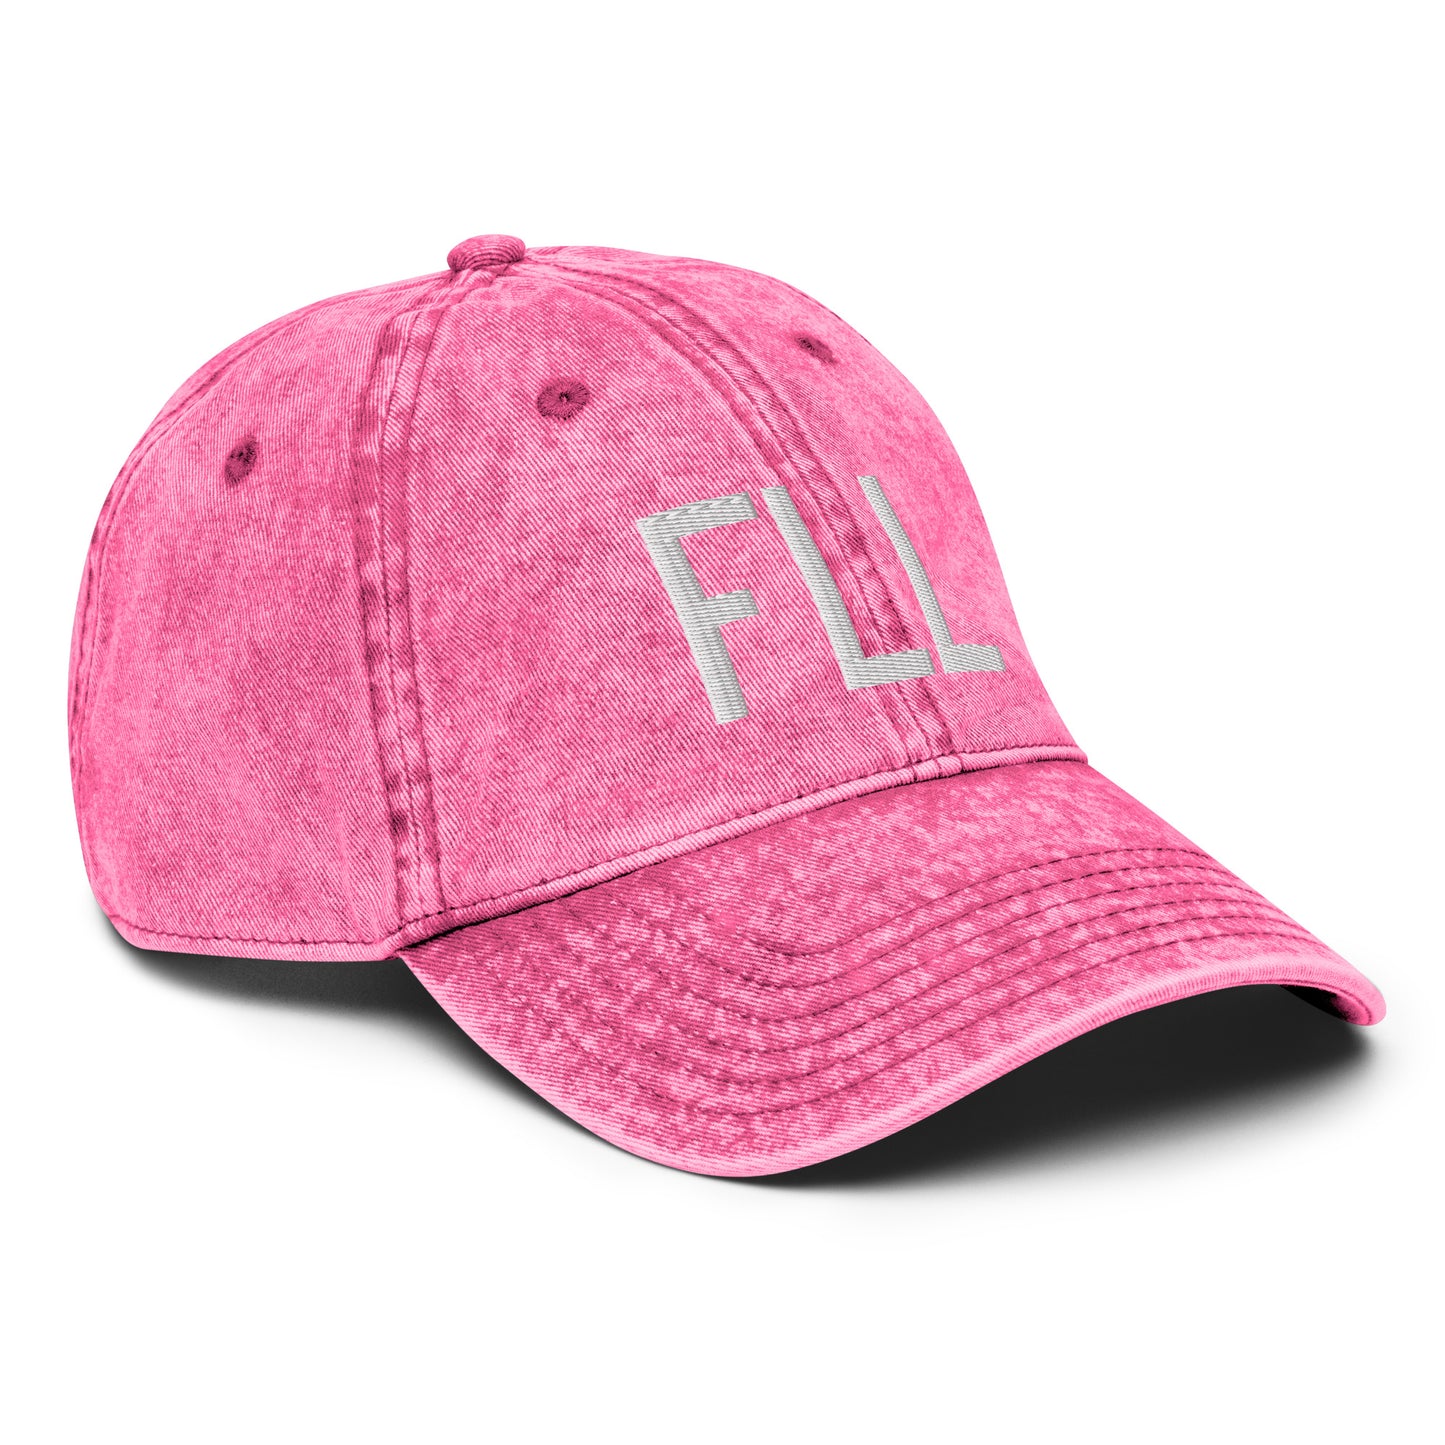 Airport Code Twill Cap - White • FLL Fort Lauderdale • YHM Designs - Image 27